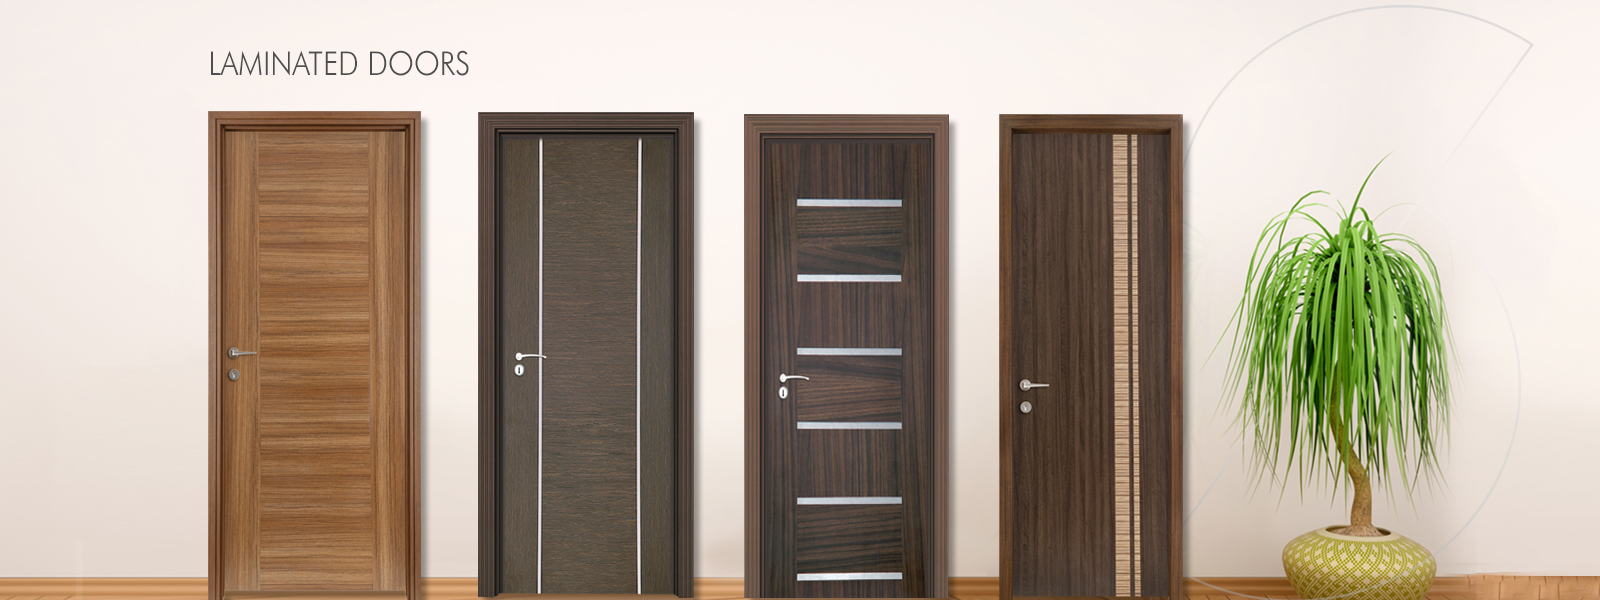 Pros and Cons of Laminates Doors